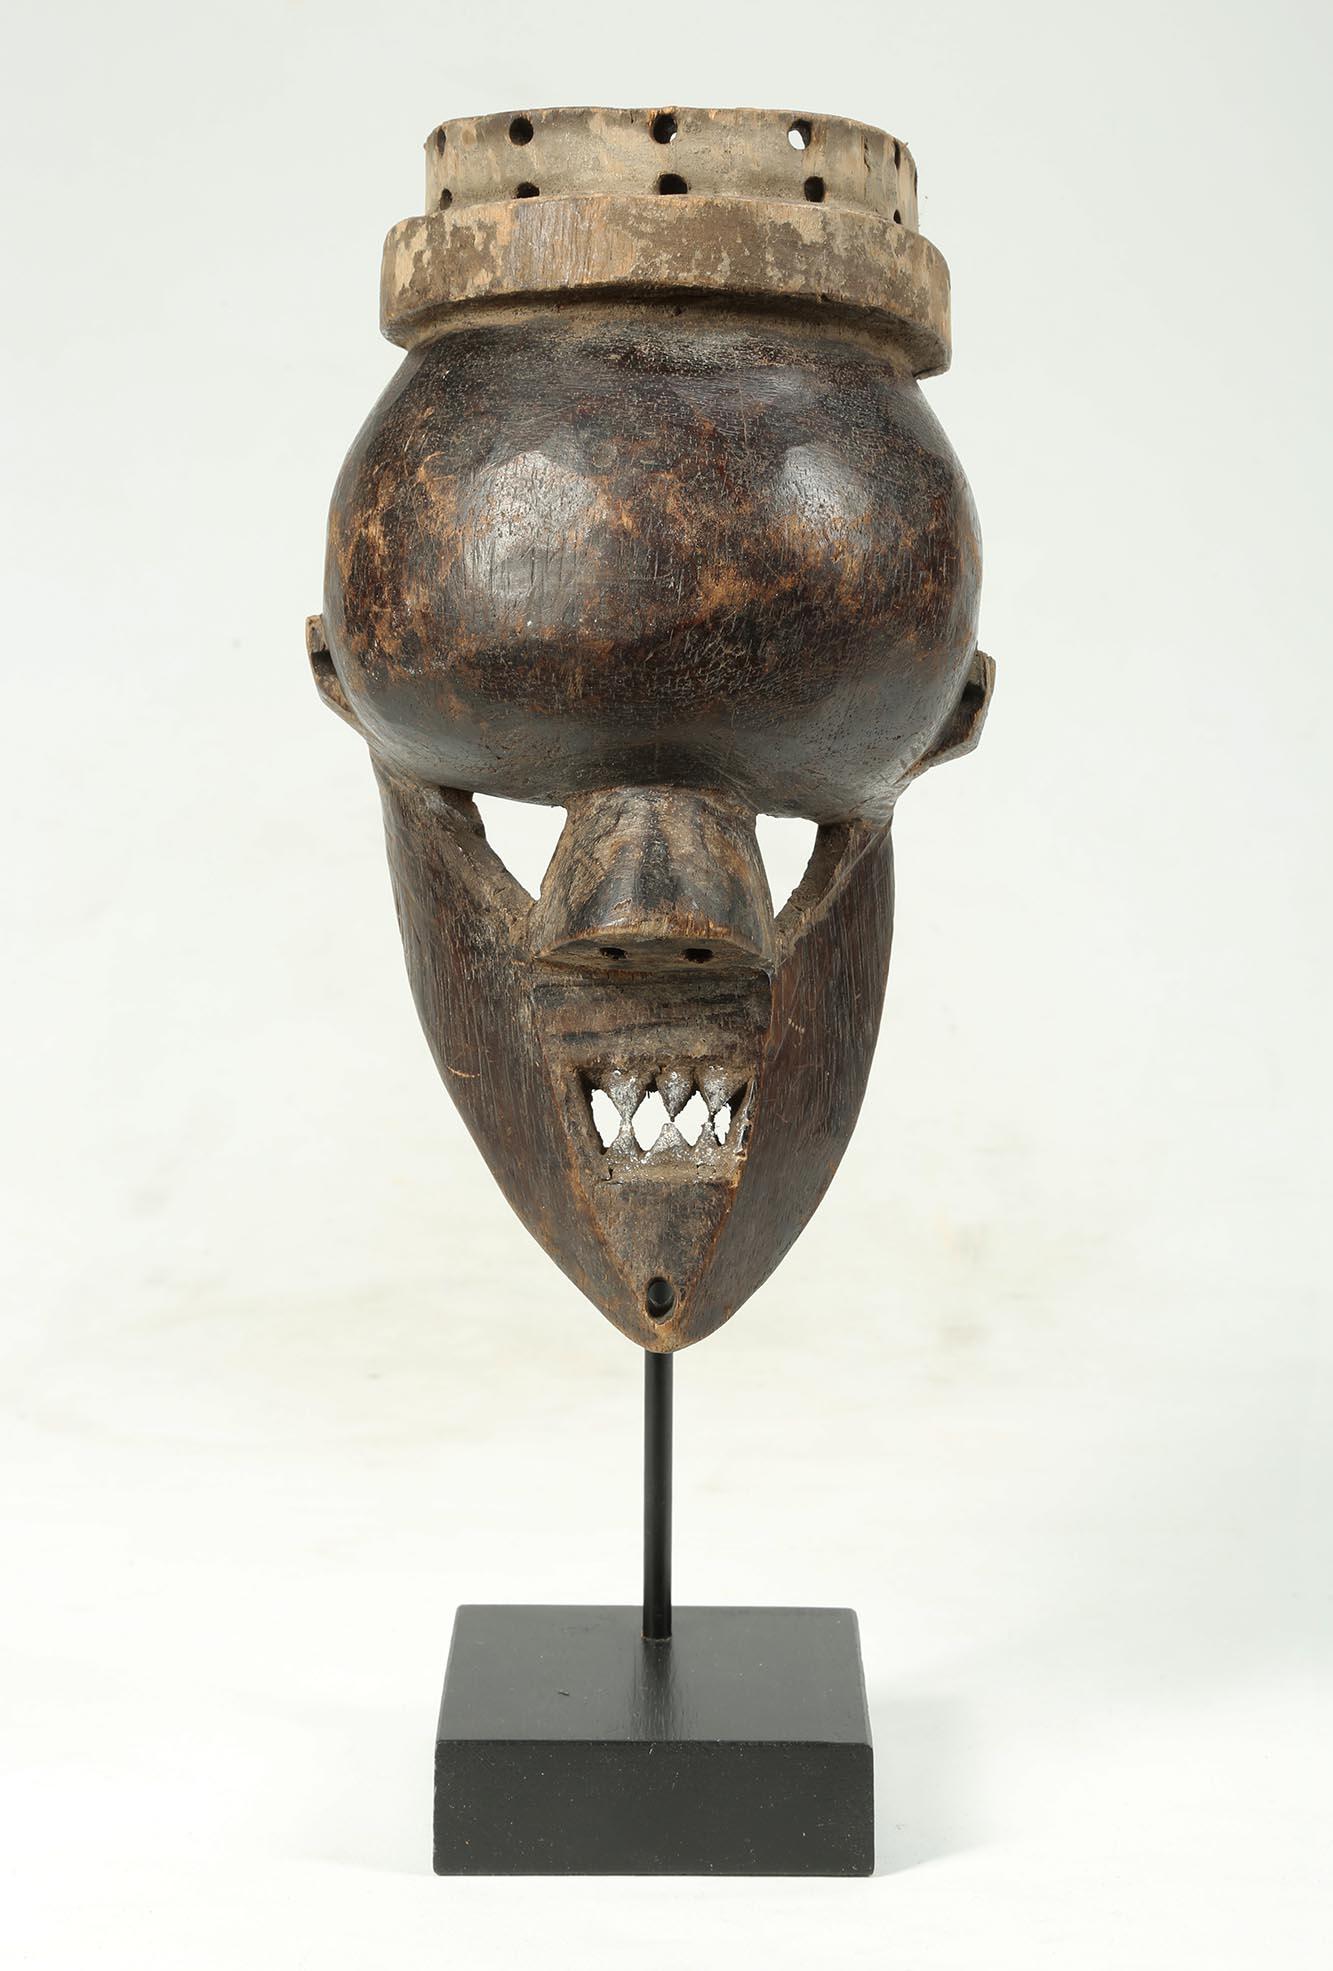 Salampasu warrior mask, Democratic Republic of Congo, Africa, early 20th century. With remains of black and white pigments. Open mouth with pointed teeth, and open triangular eyes. On custom wood and metal stand. Small ones like this are considered